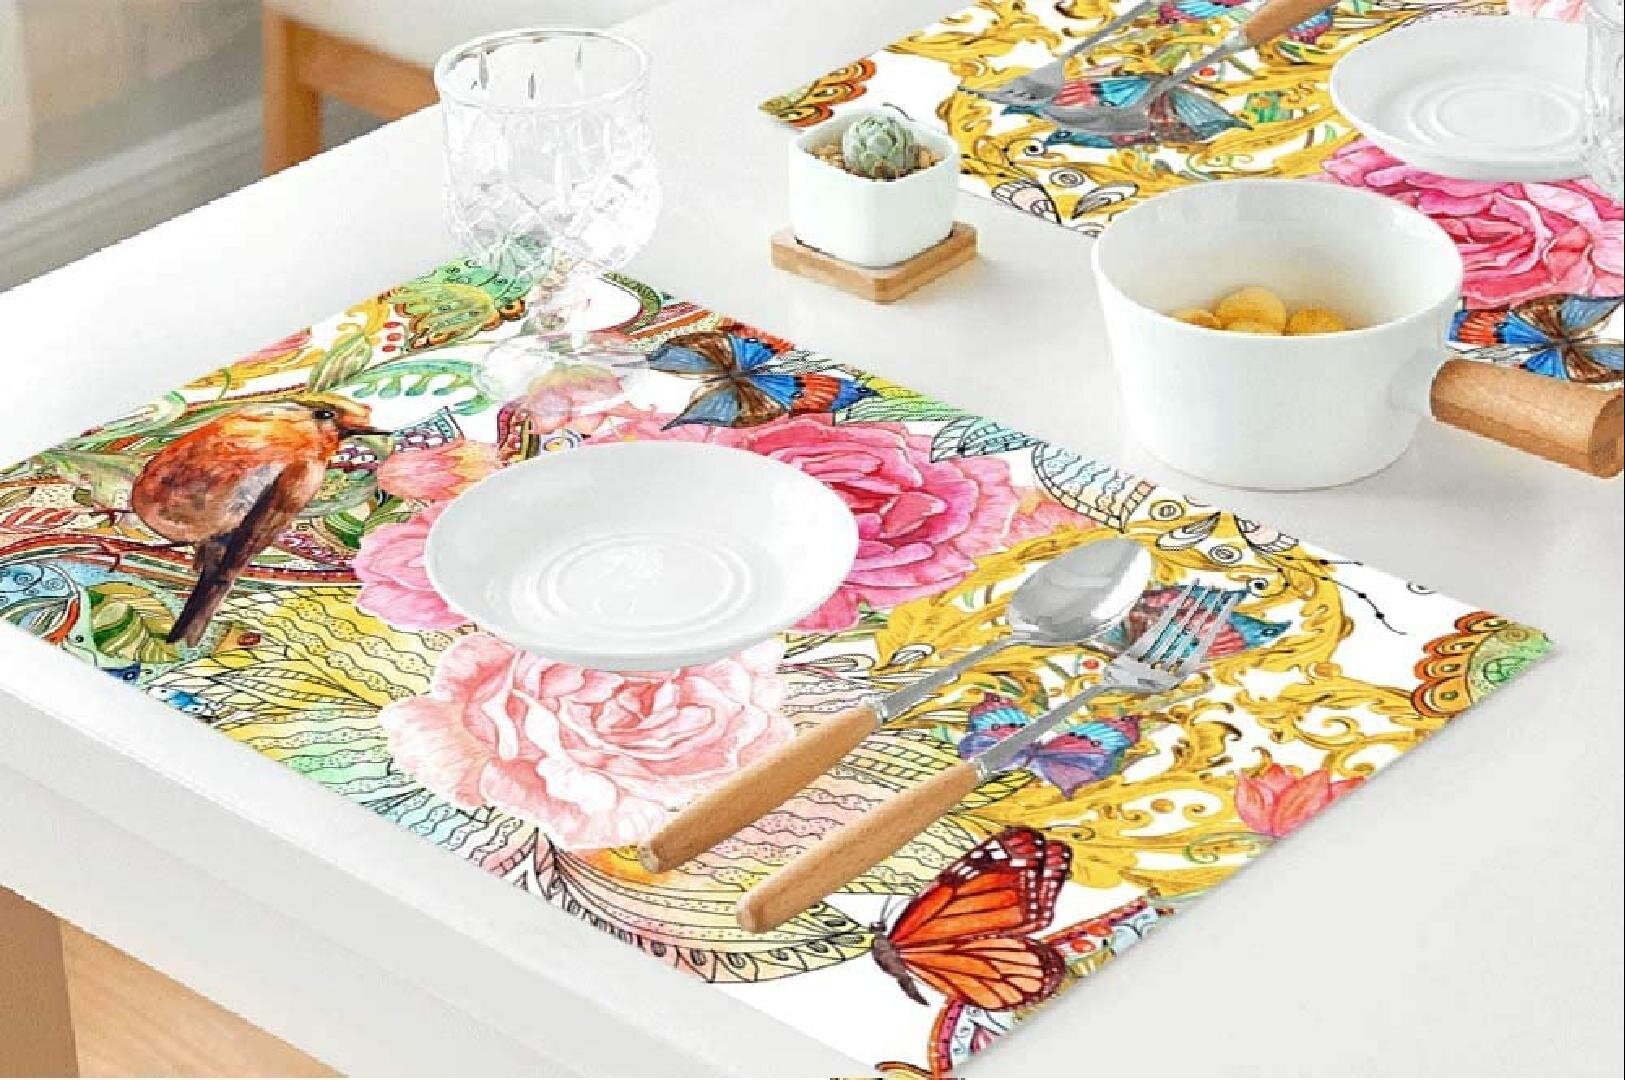 Hand Drawn Day Of The Dead Colorful Sugar Skull With Floral Ornament Flower Seamless Pattern Round Placemats for Dining Table Placemat Set of 6 Table Settings Table Mats for Home Kitchen Holiday Decor